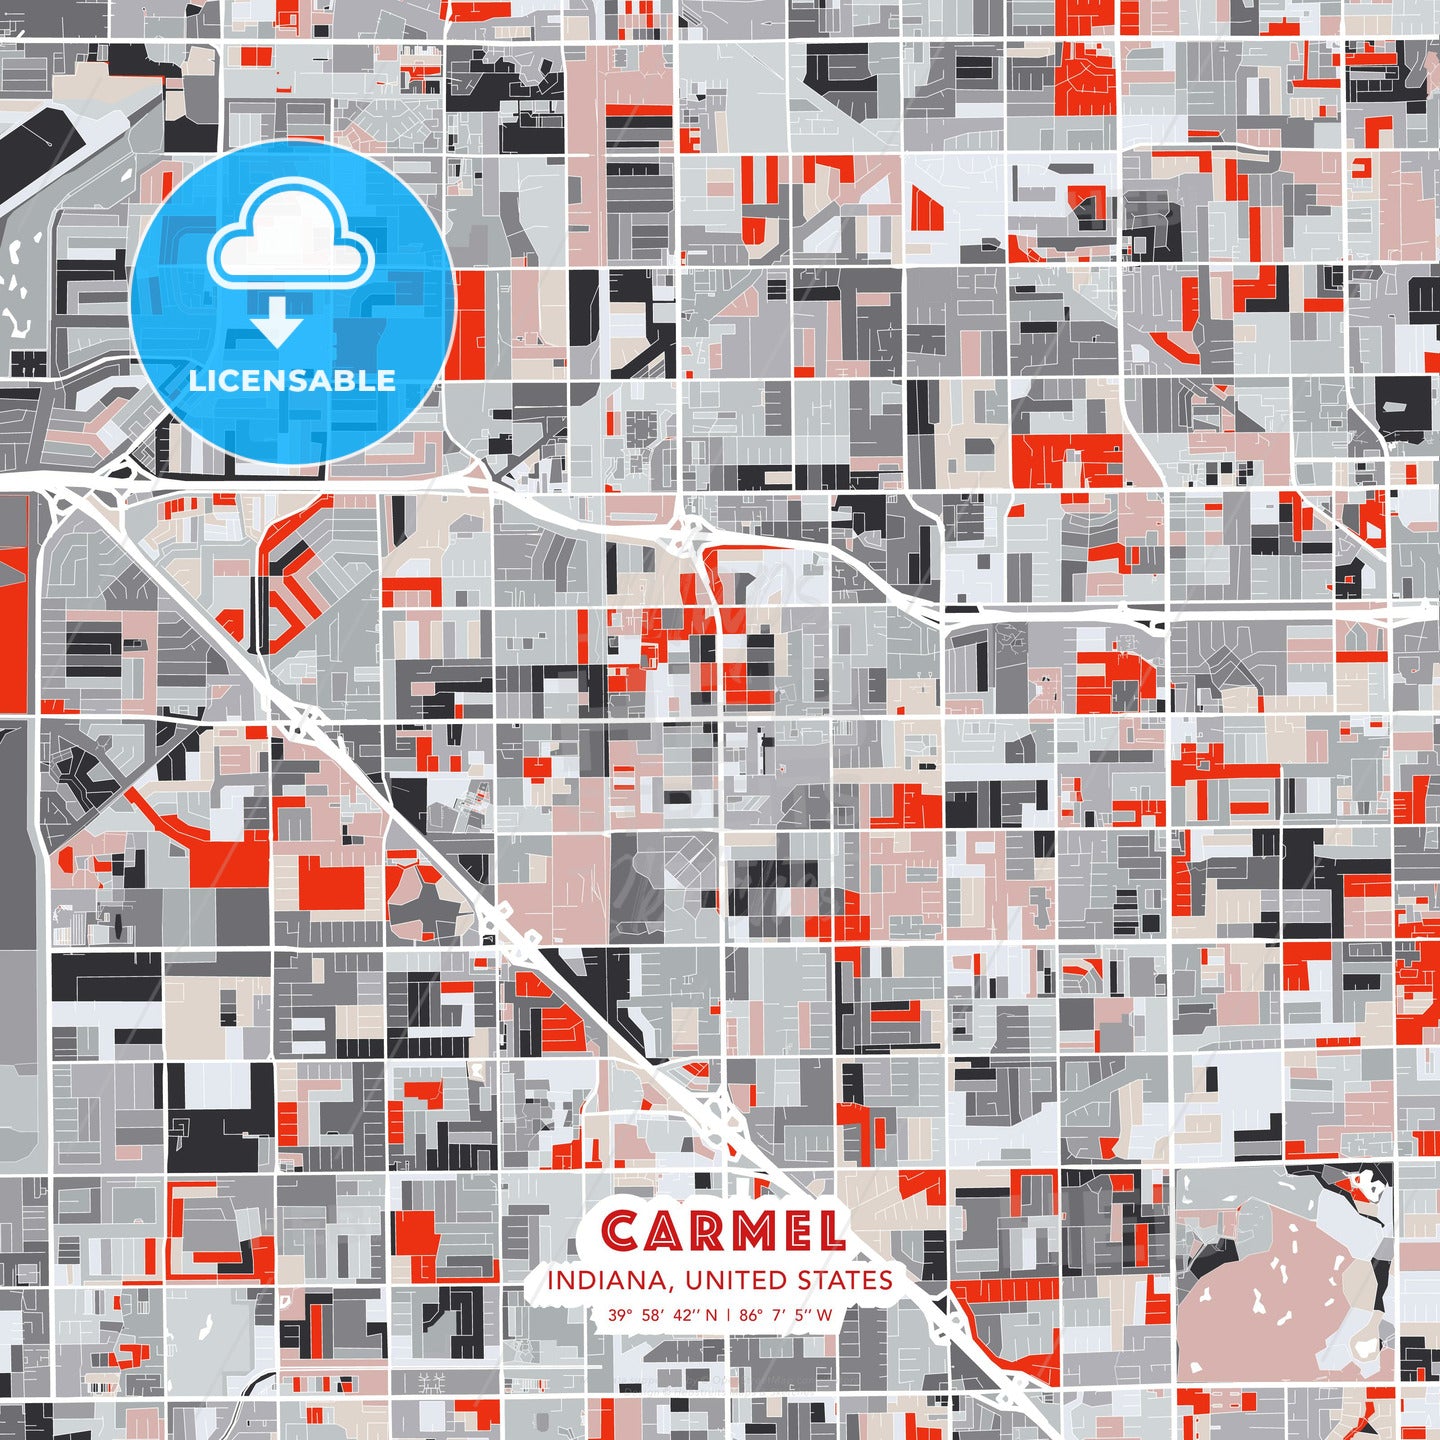 Carmel, Indiana, United States, modern map - HEBSTREITS Sketches